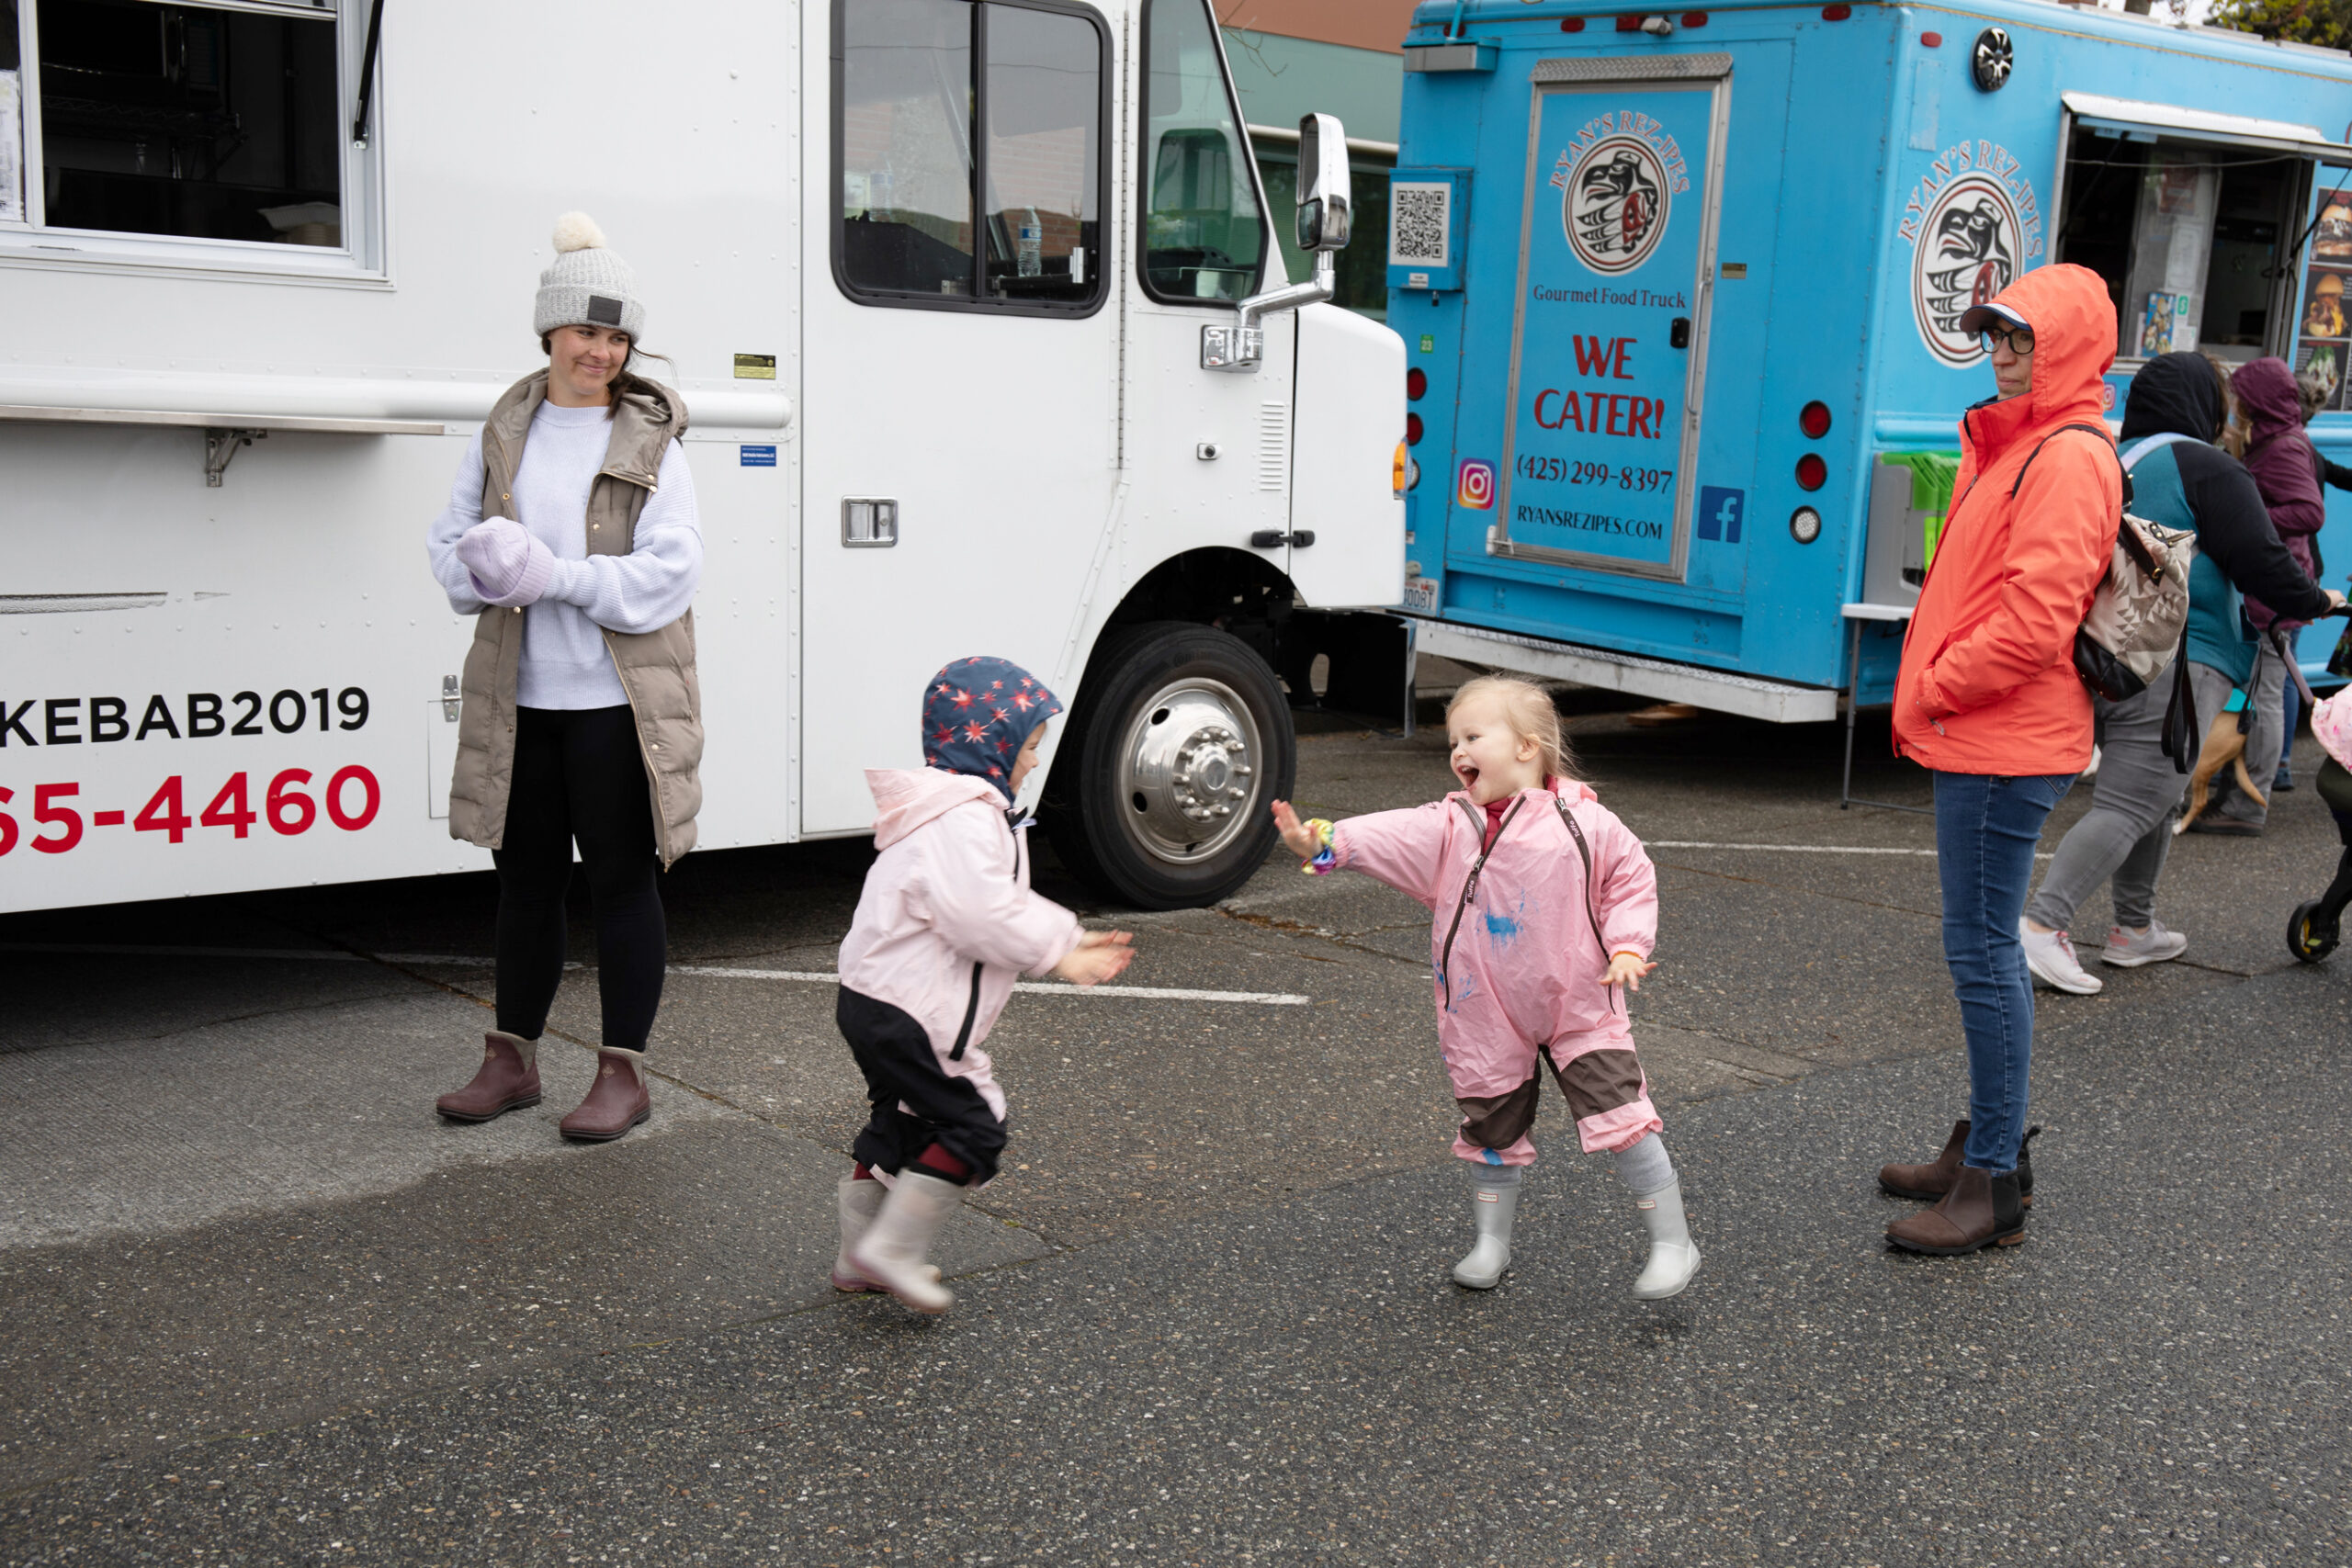 Two young girls in pink chasing and playing in front of two food trucks